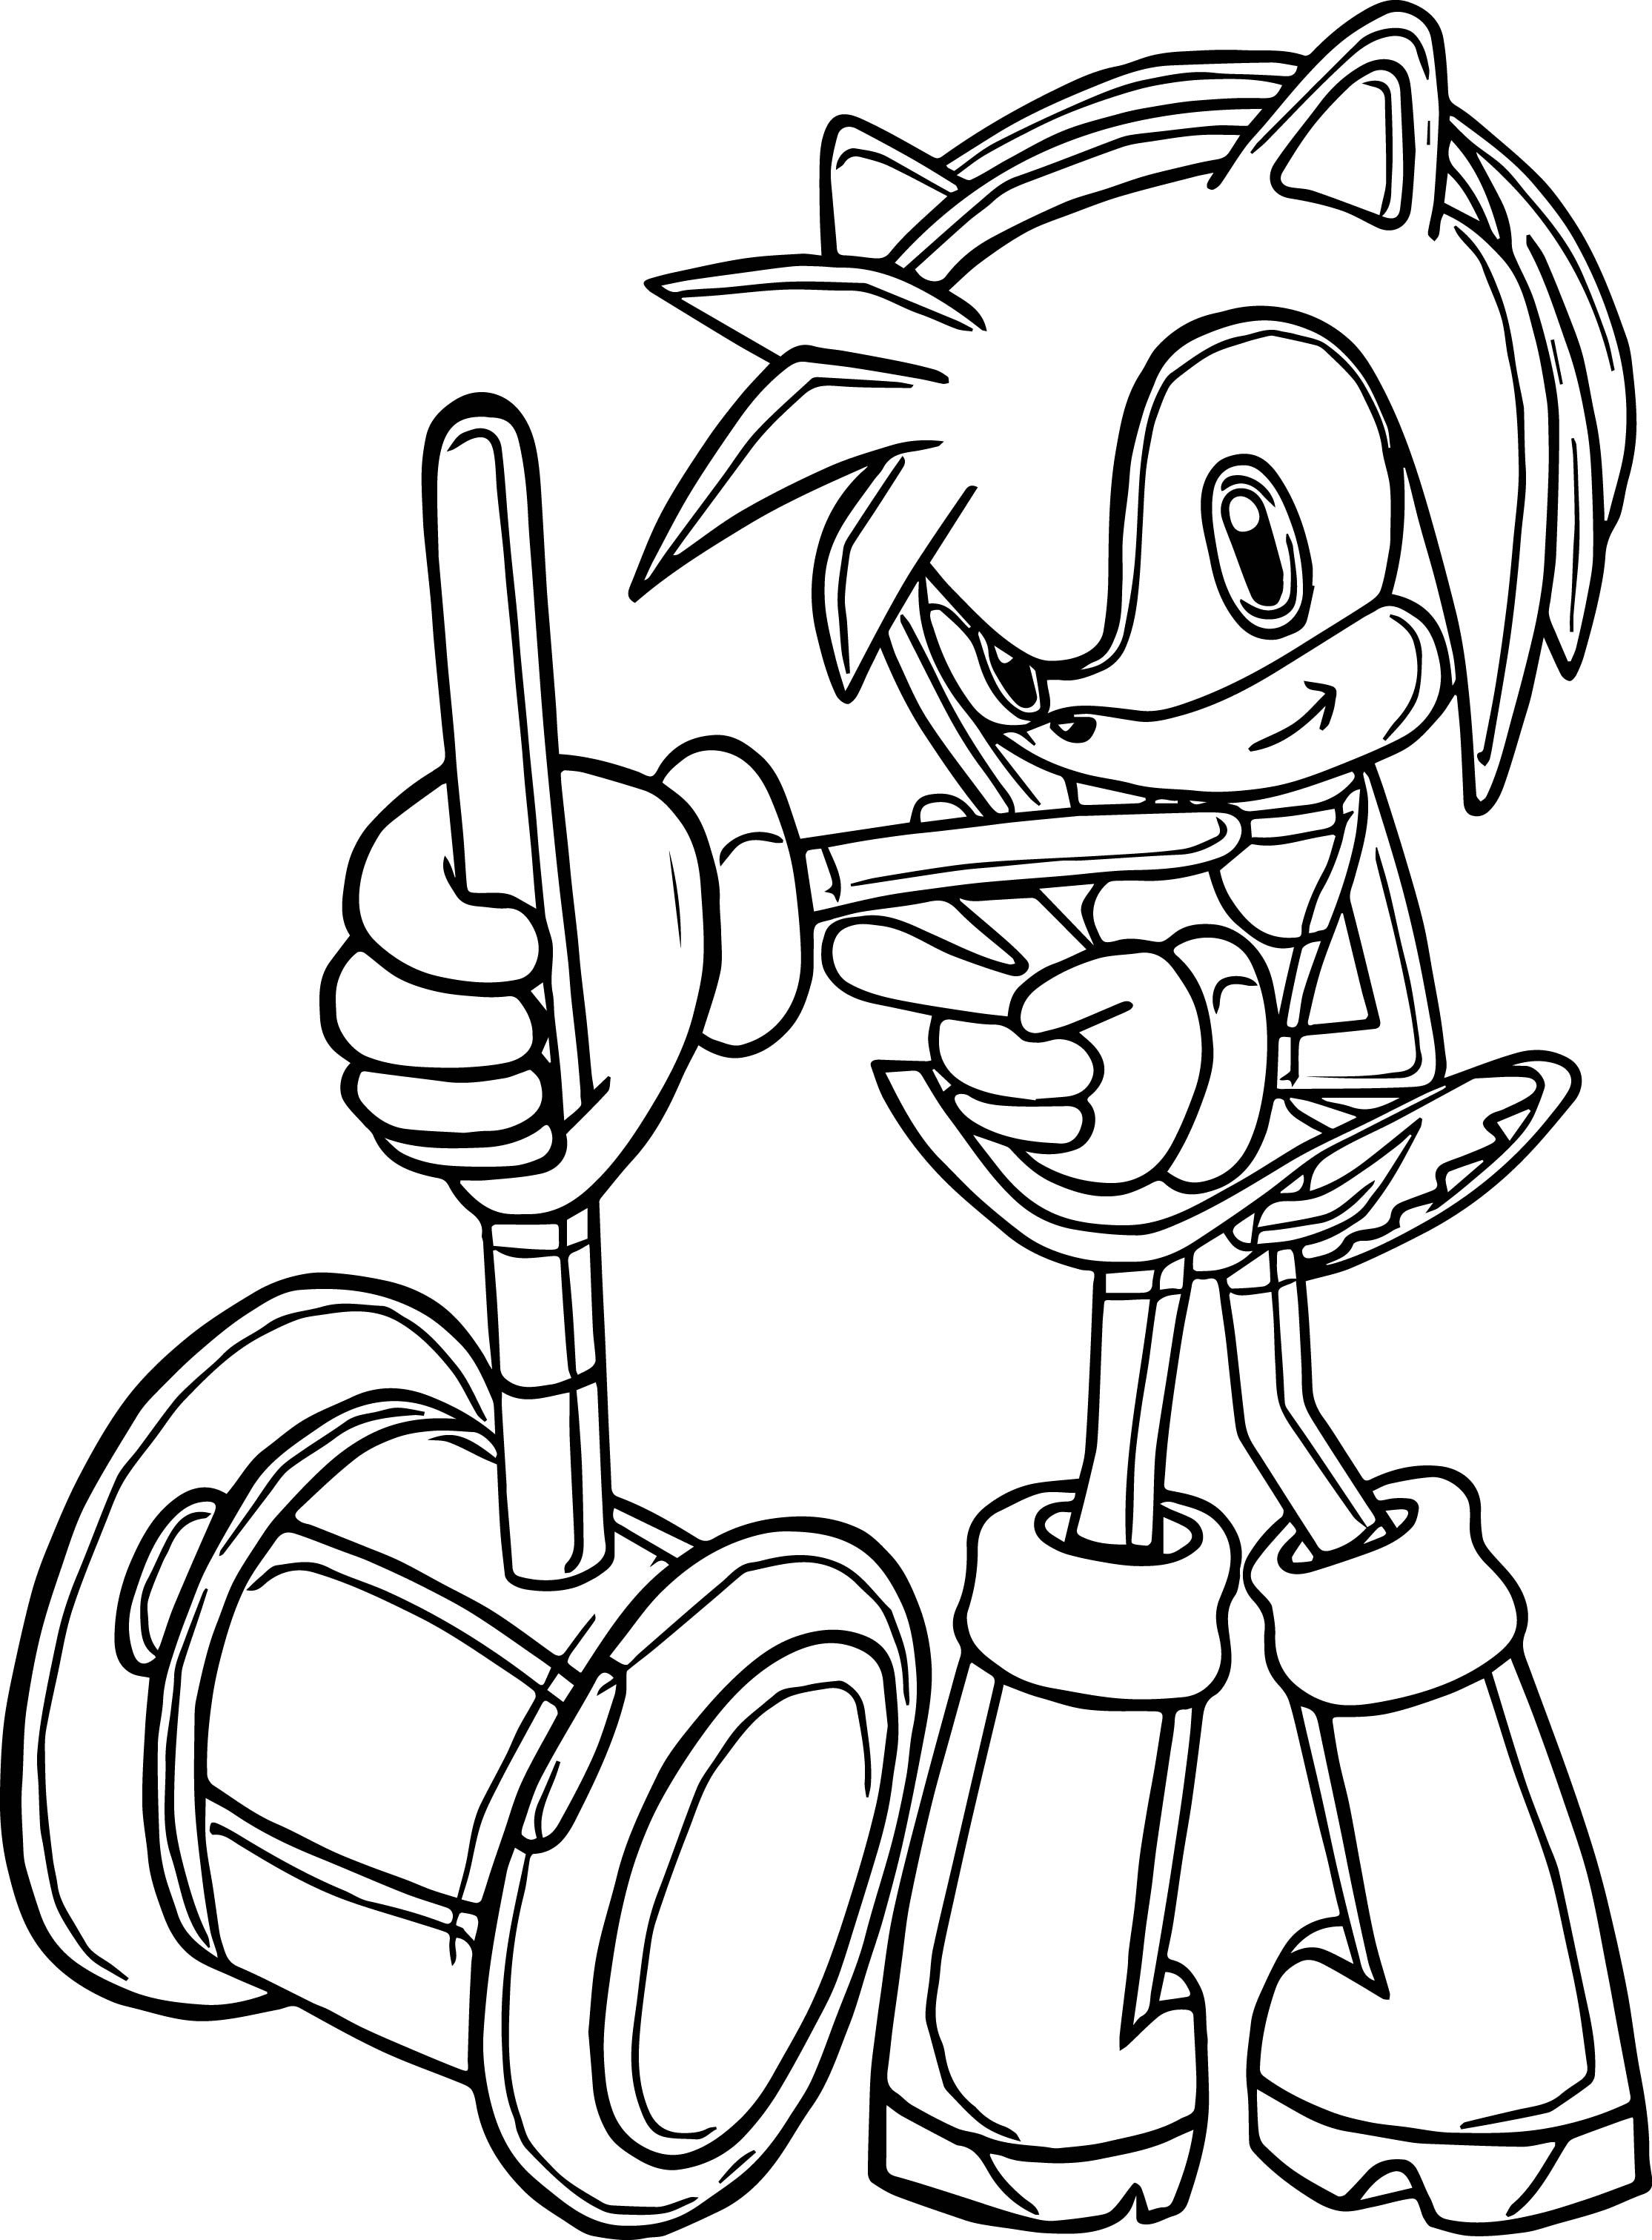 Nice Amy Rose My Hammer Coloring Page   Amy Rose, Coloring Pages ...